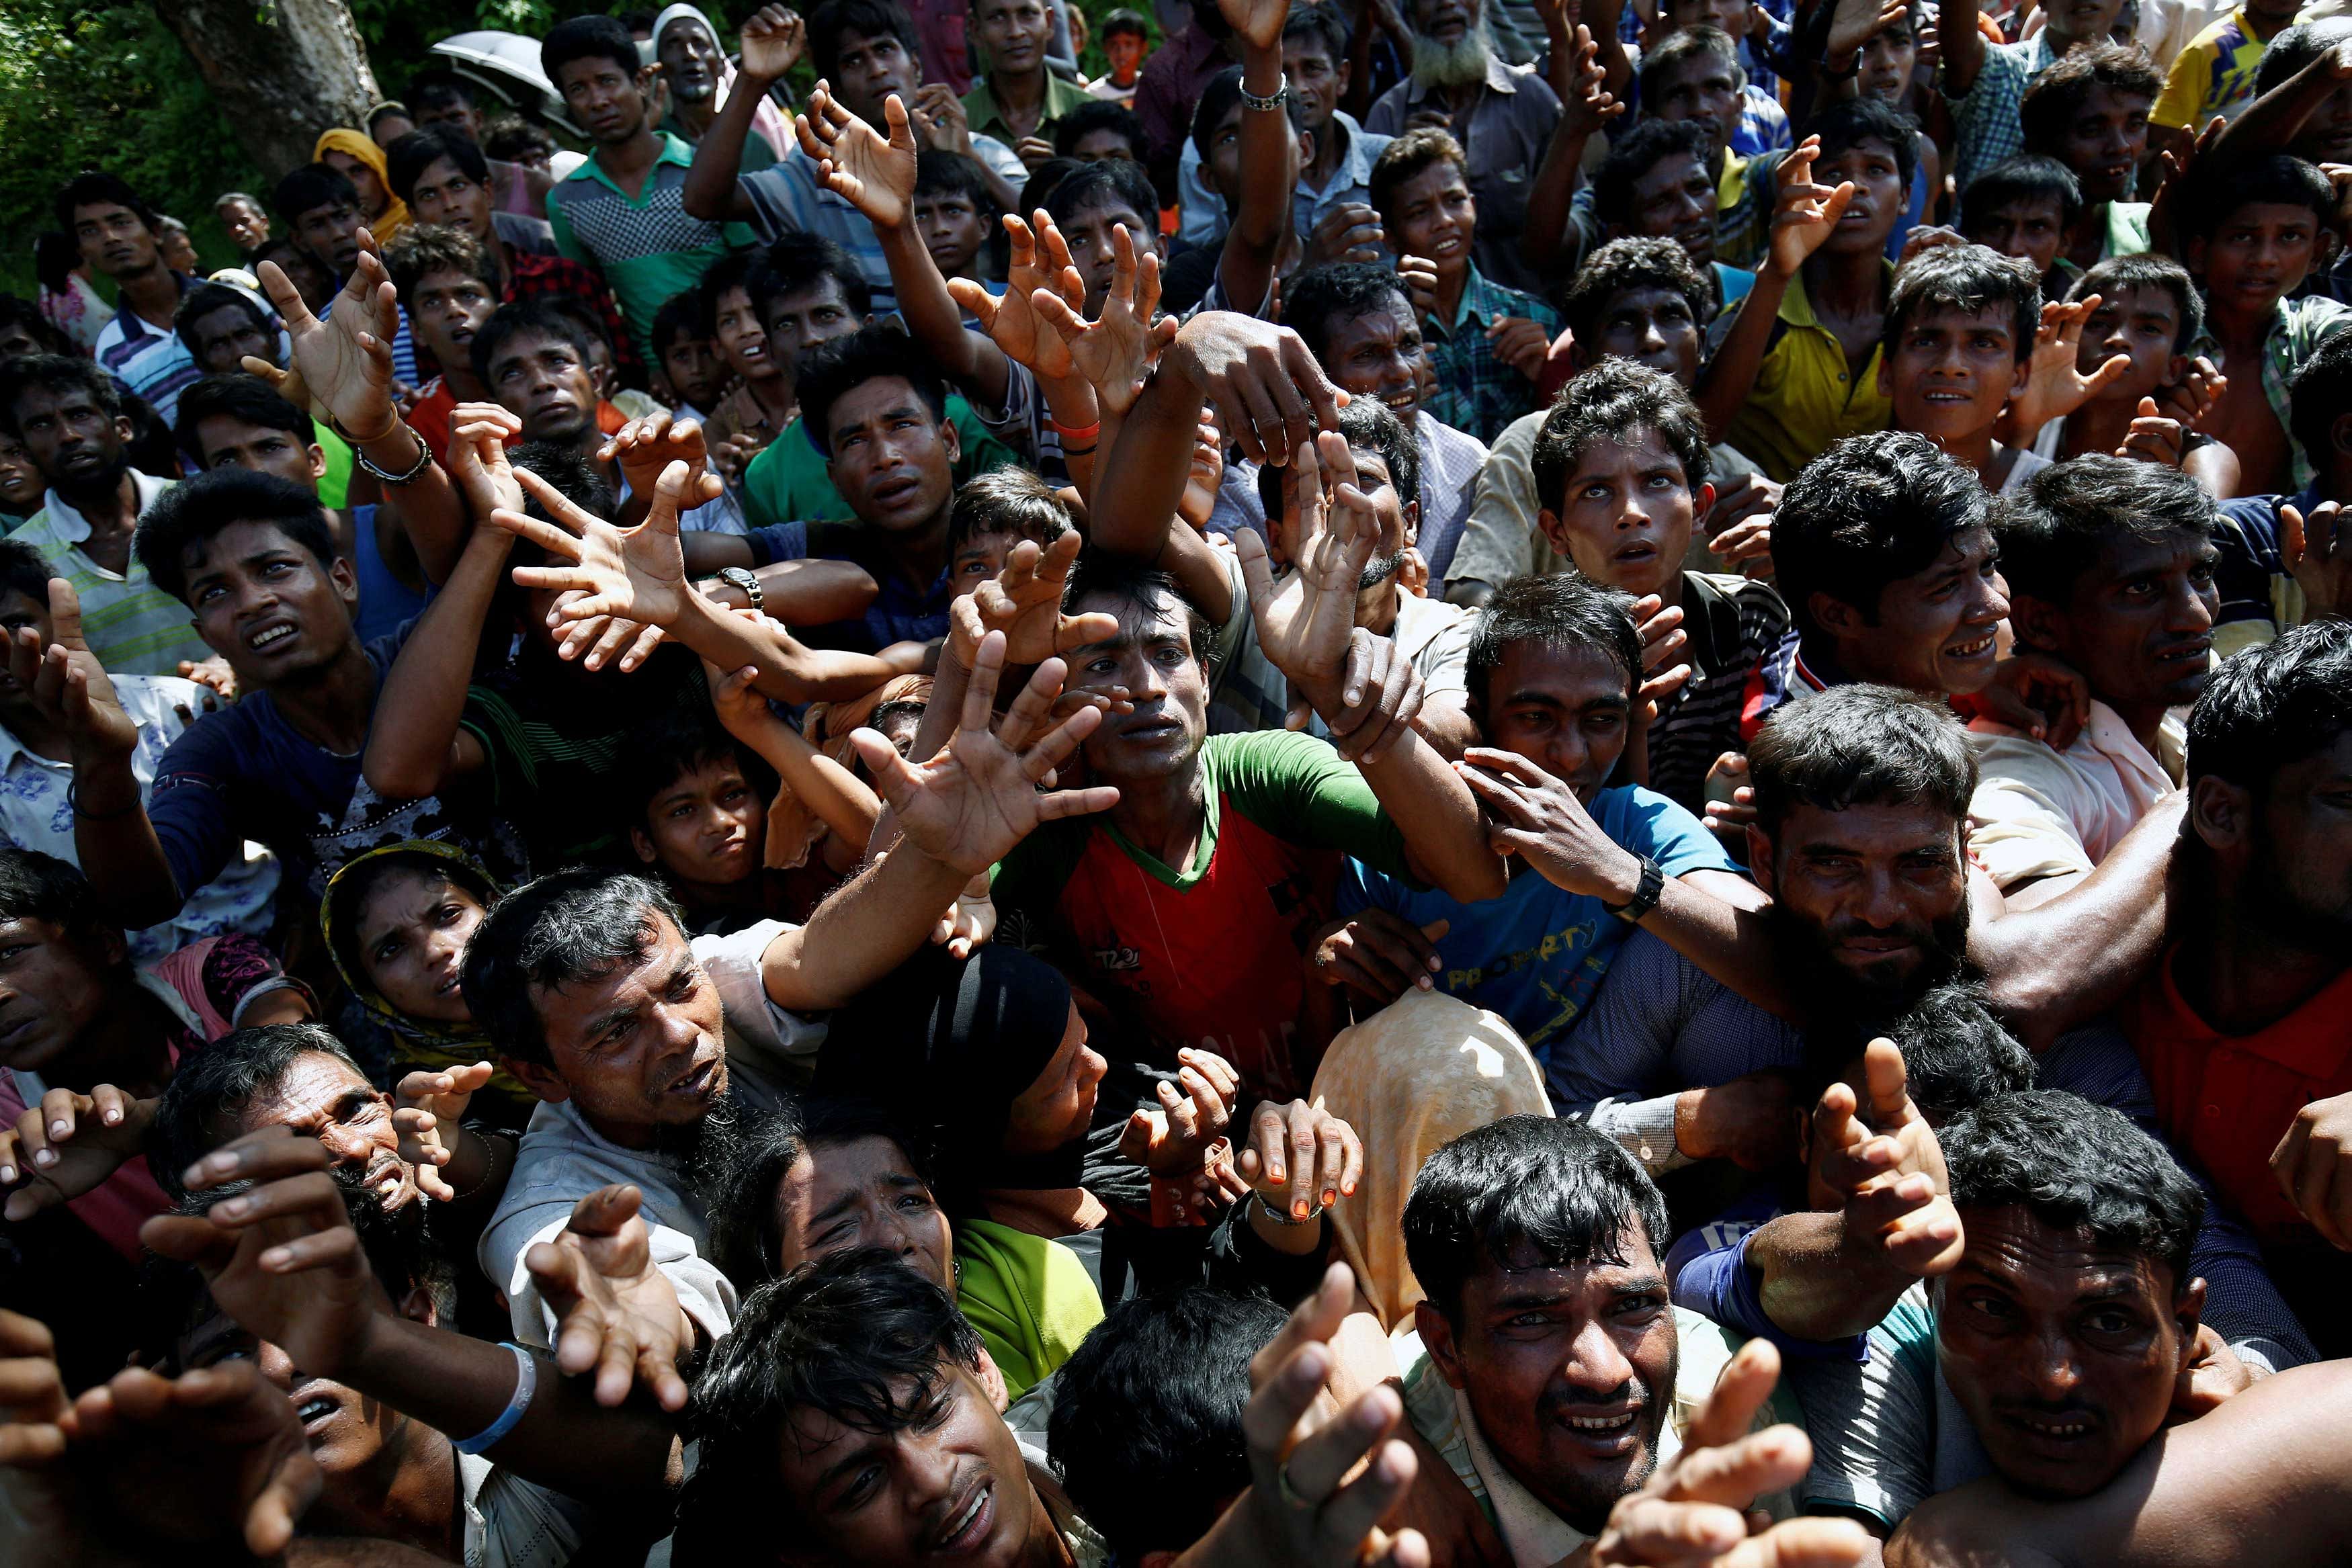 Rohingya refugees strech their hand for relief supplies given by local people in Cox's Bazar, Bangladesh. Reuters photo